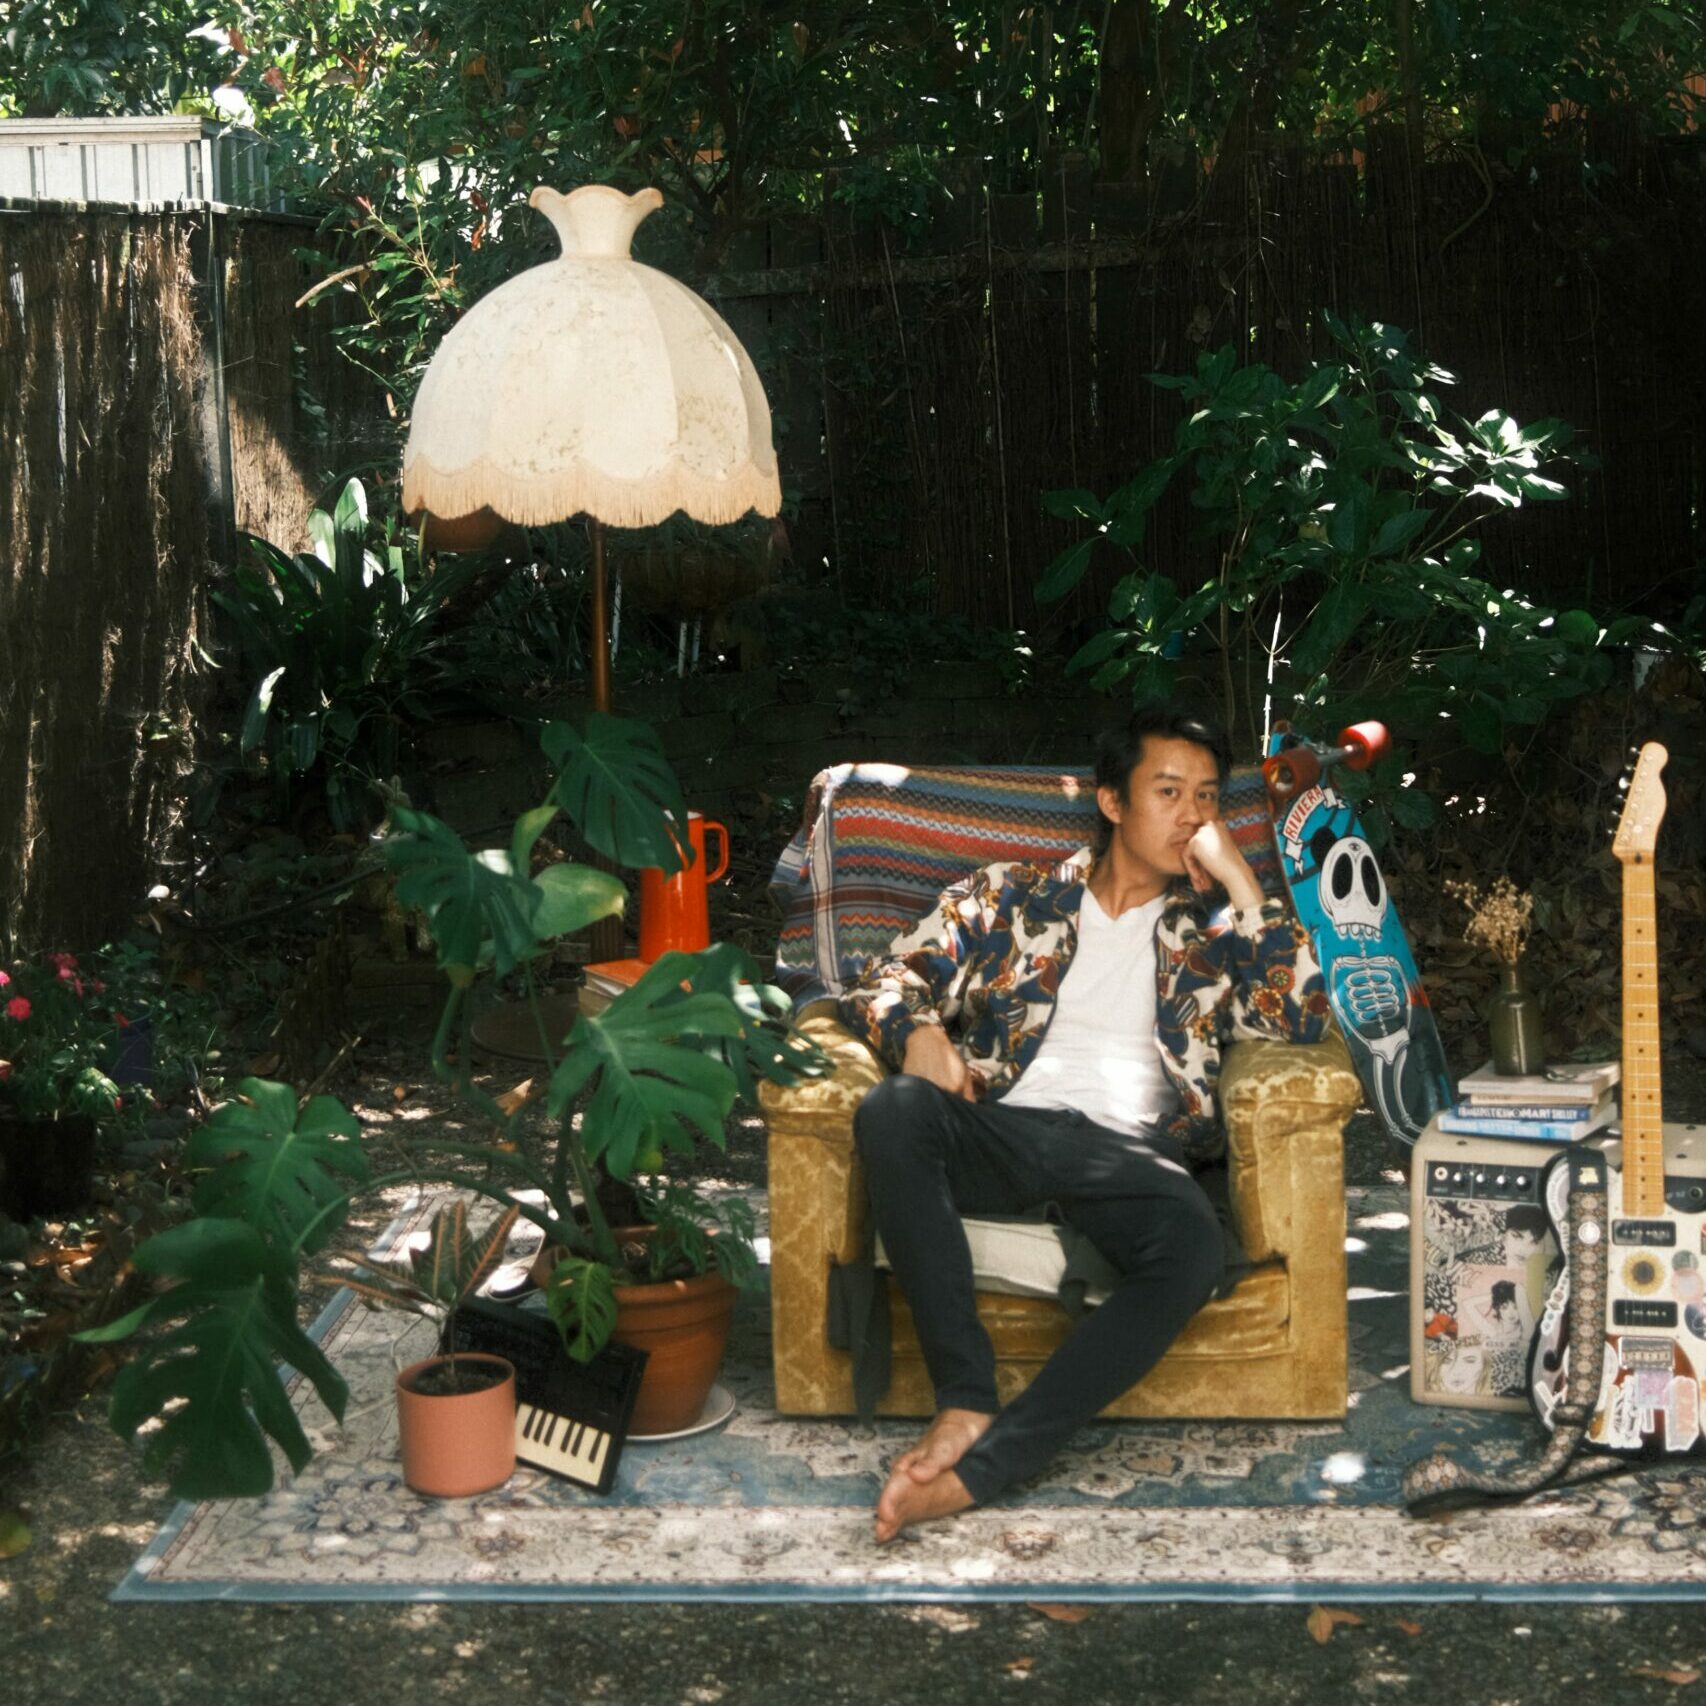 Geoff Ong’s New Single ‘When It Gets Easy’ Captures the Journey of Growing Up